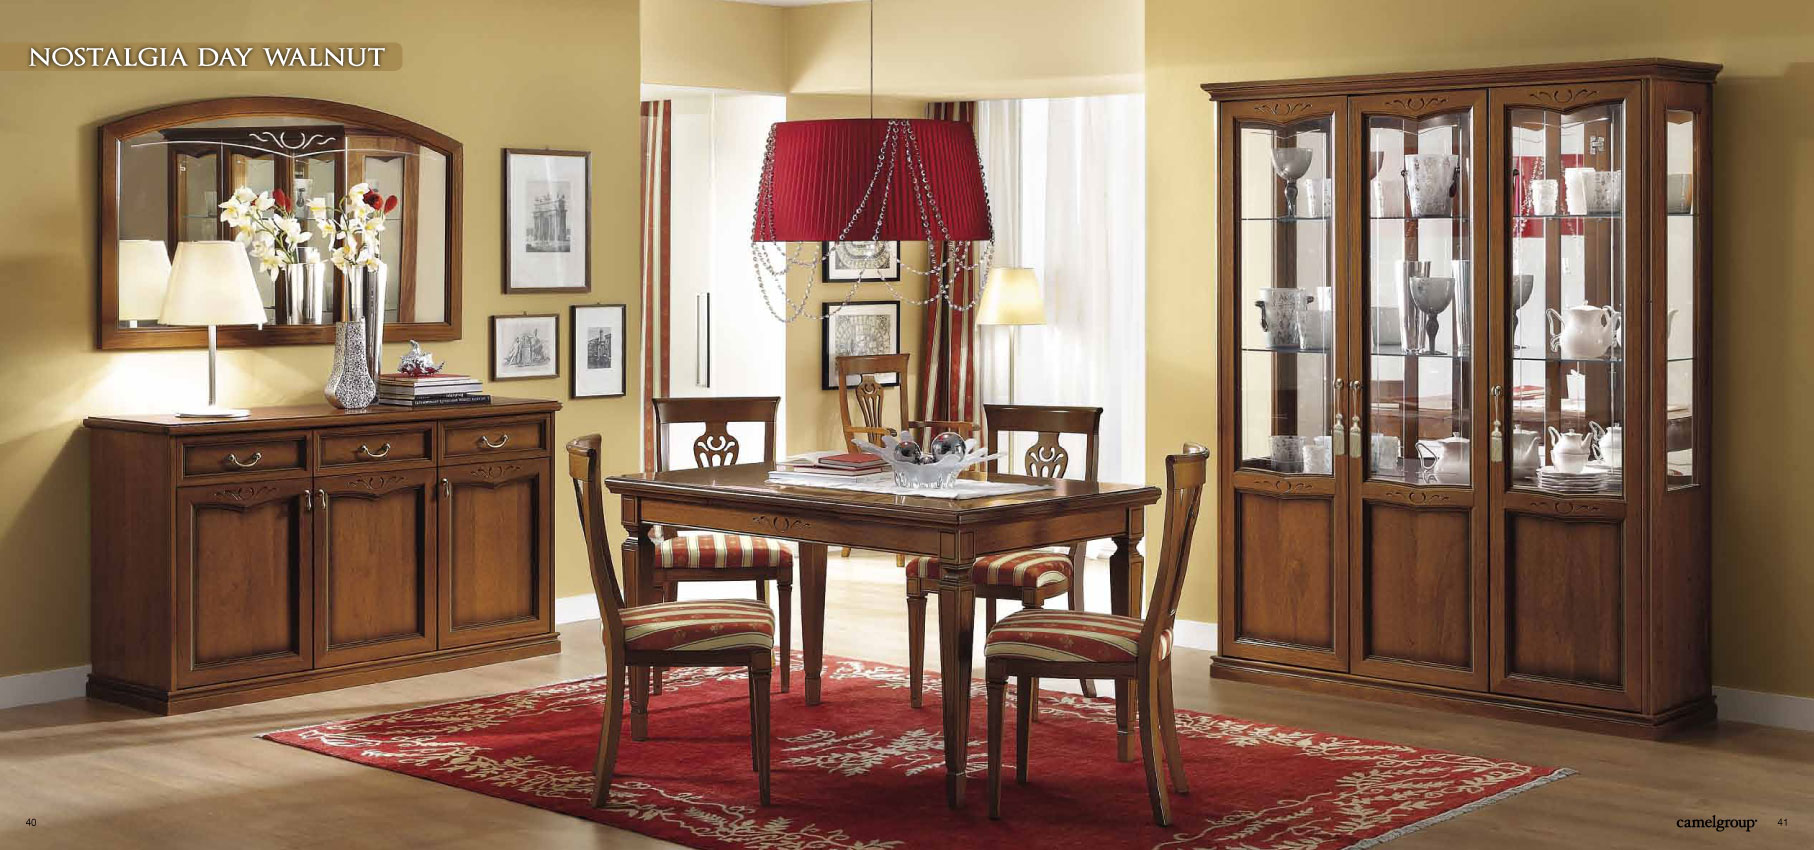 Clearance Dining Room Nostalgia Day Walnut